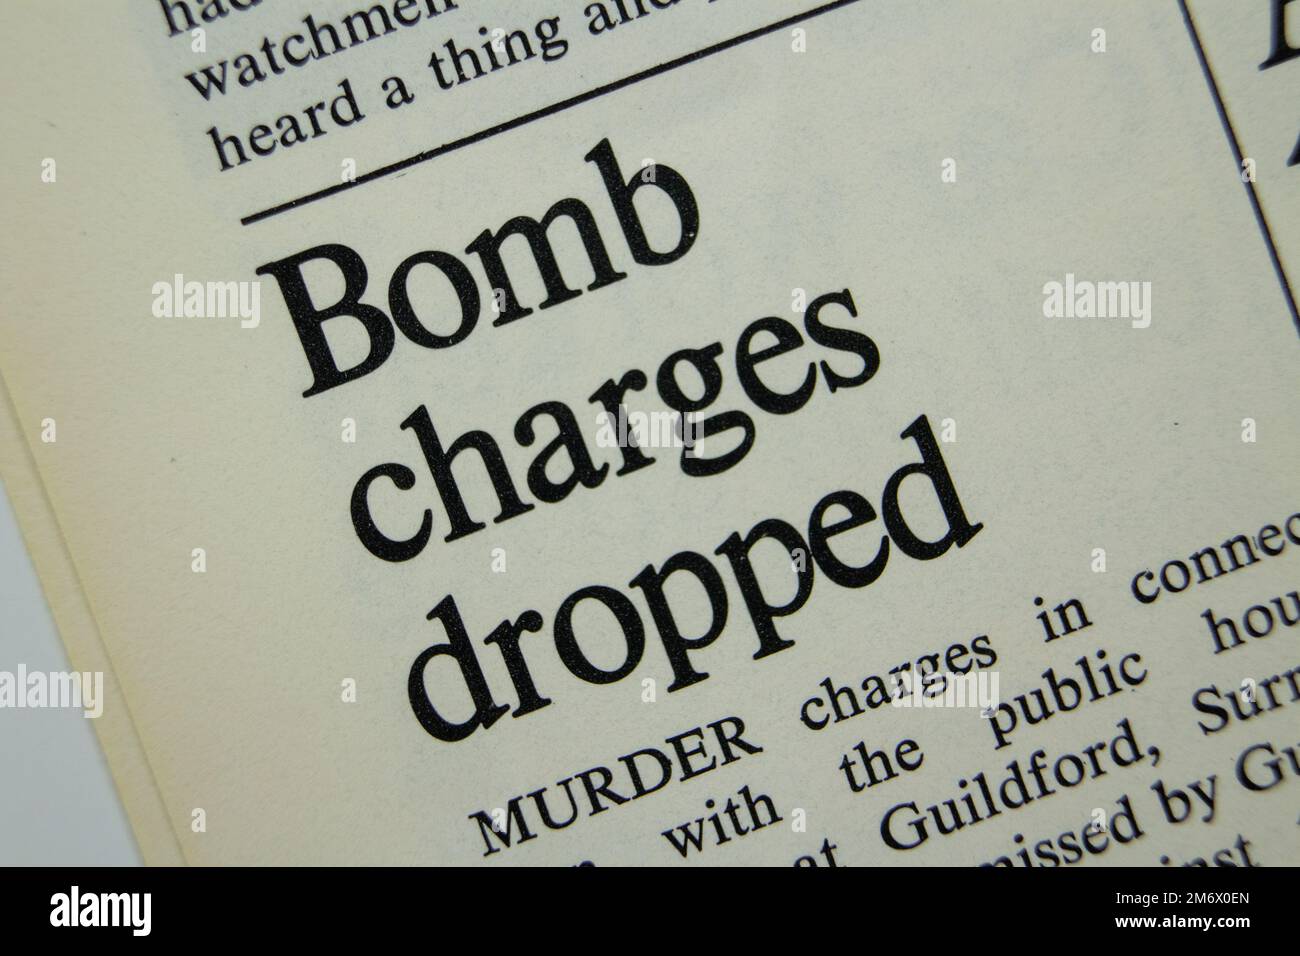 Bomb charges dropped - news story from 1975 newspaper headline article title Stock Photo